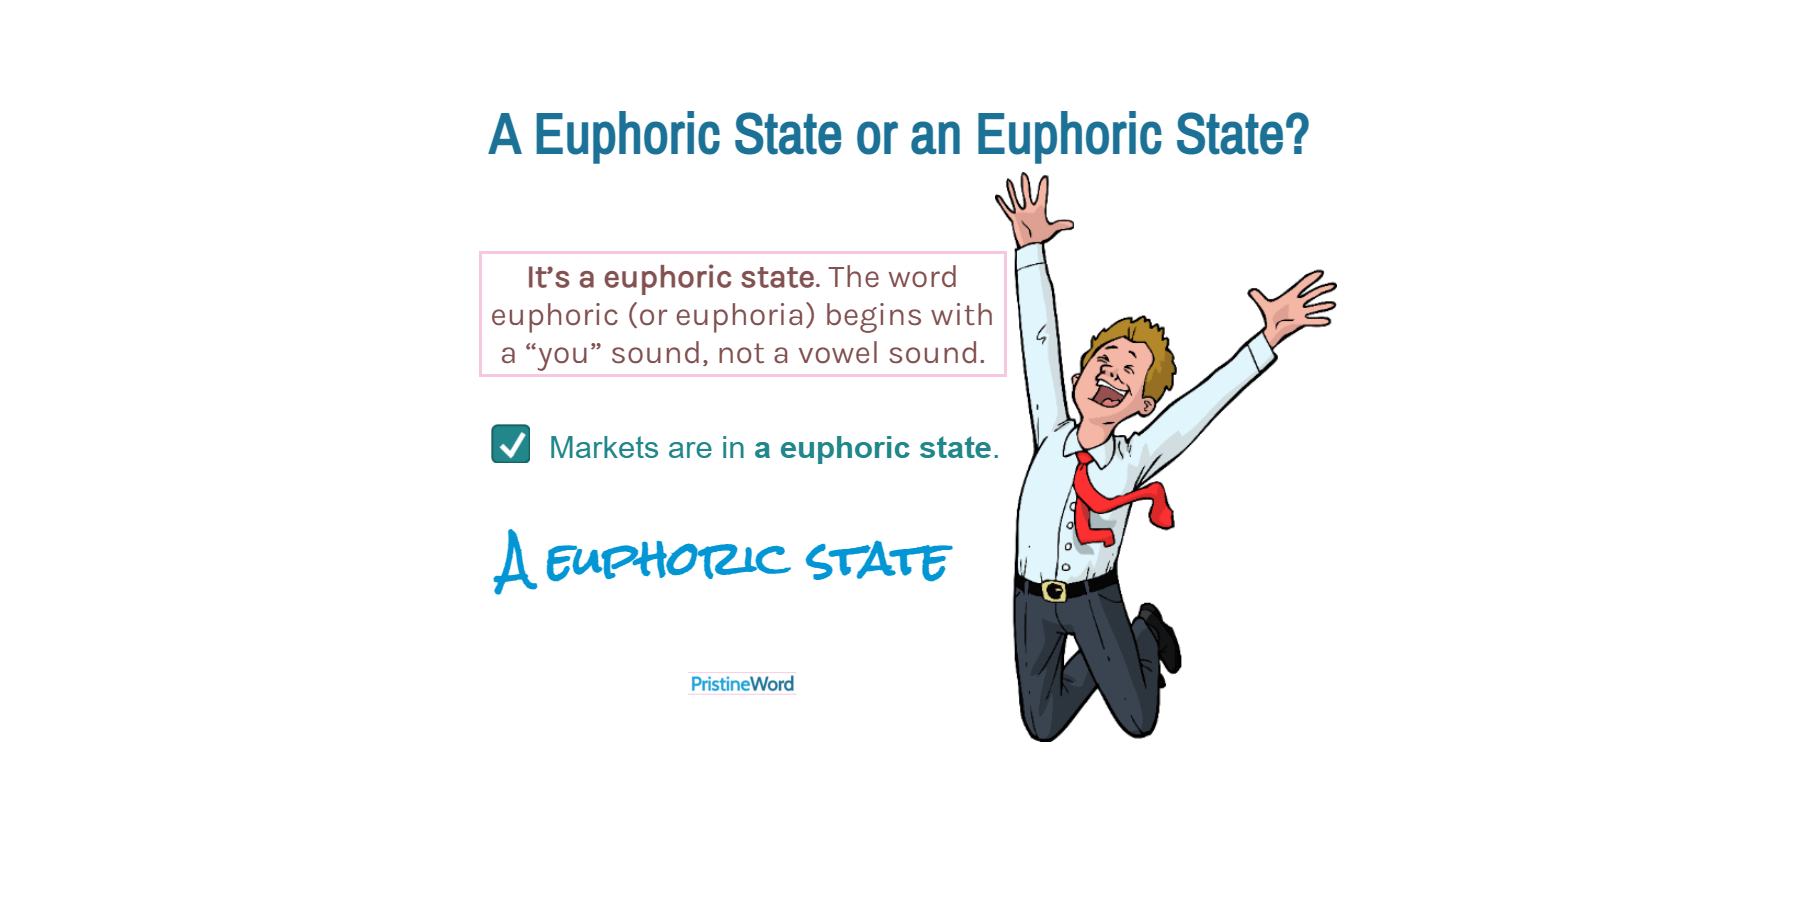 Is It a Euphoric or an Euphoric?